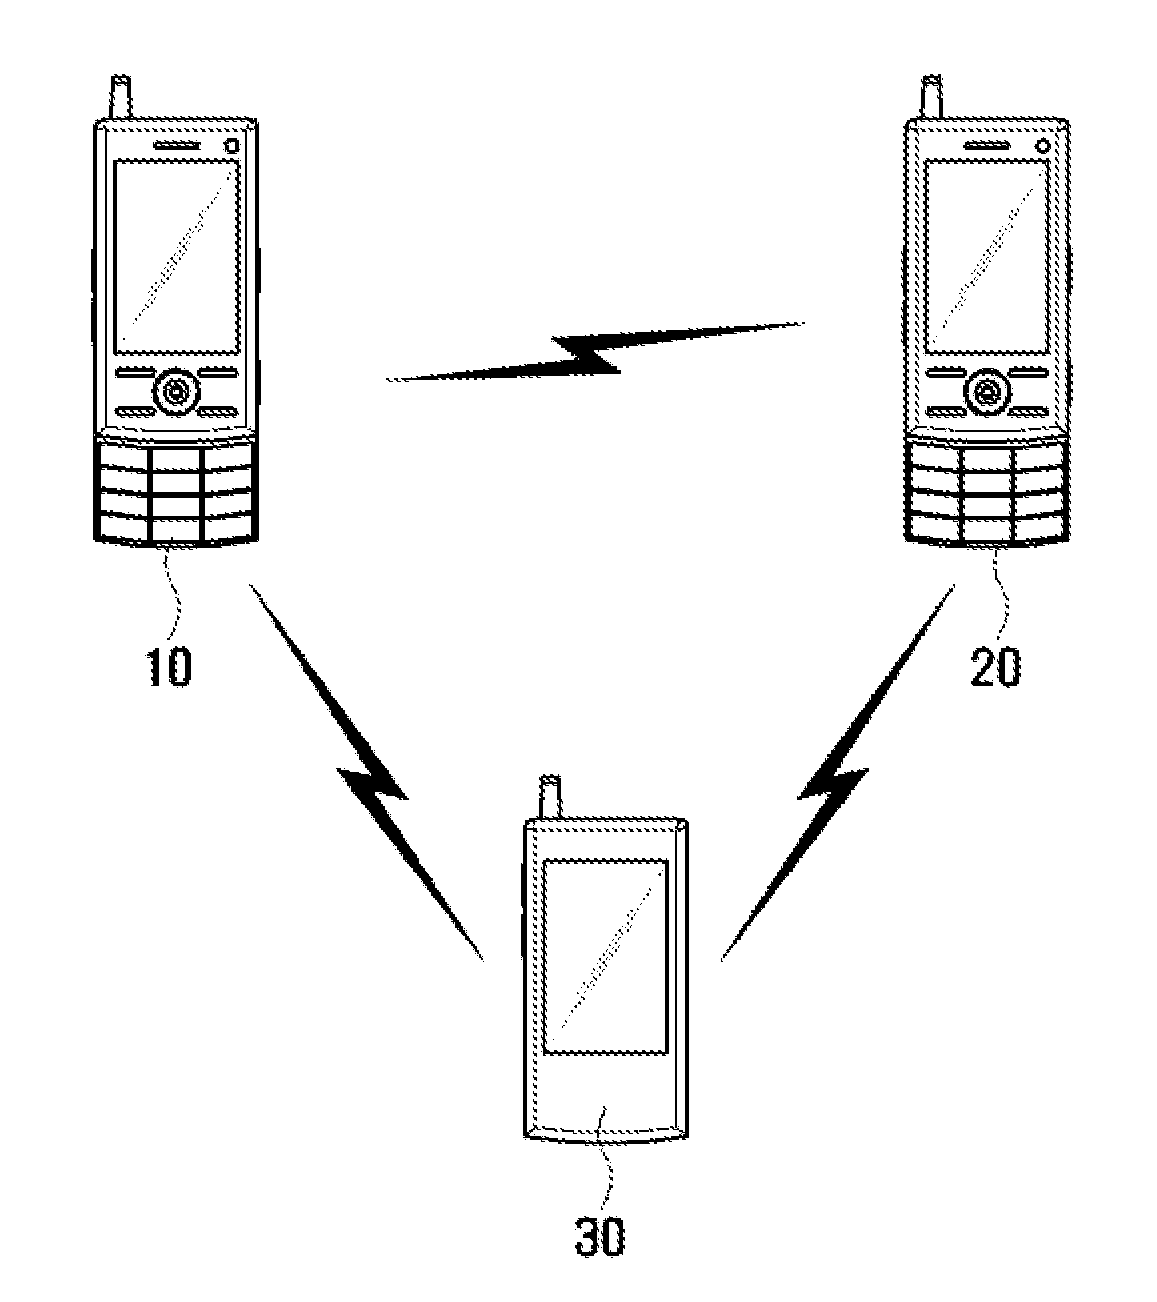 System and method for connecting bluetooth devices